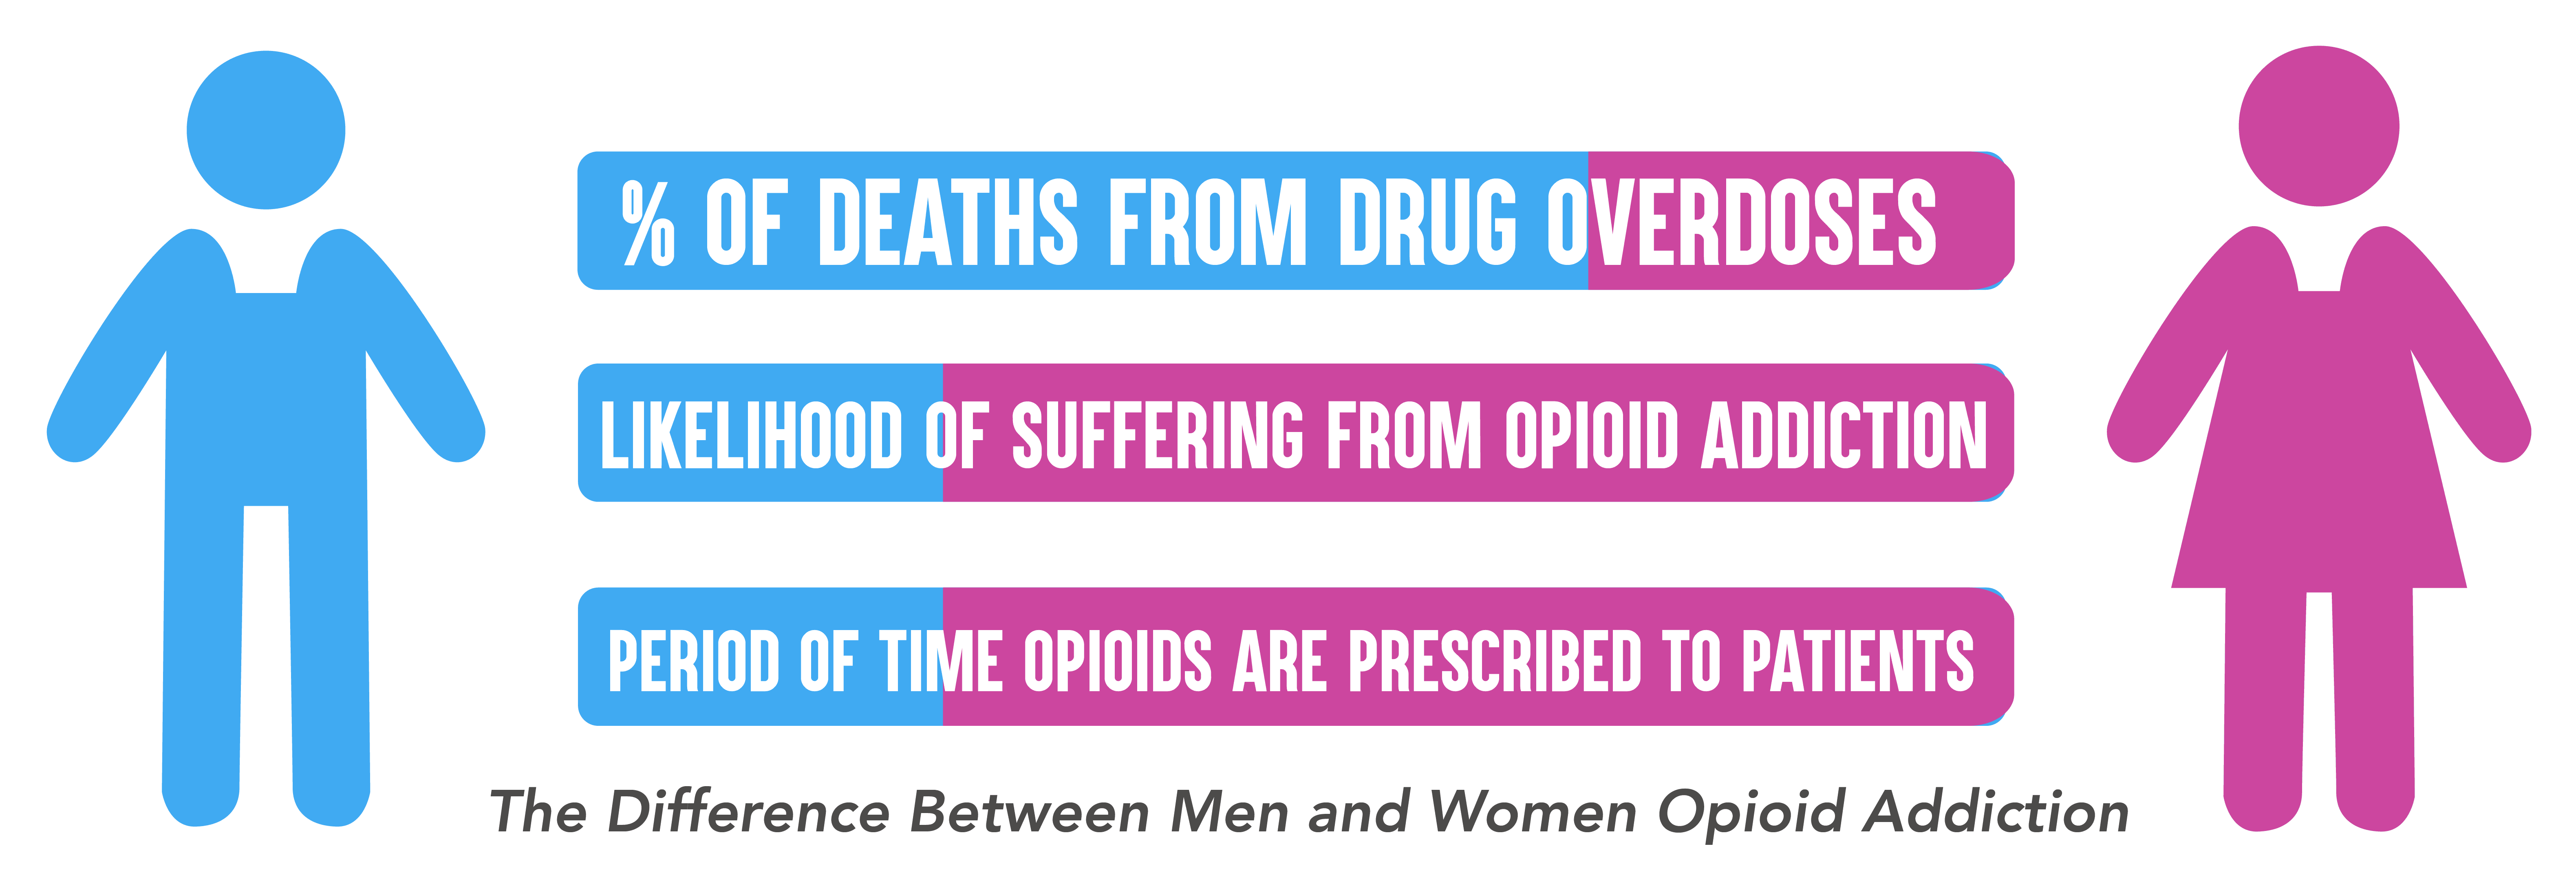 Why People Are Addicted to Opioids